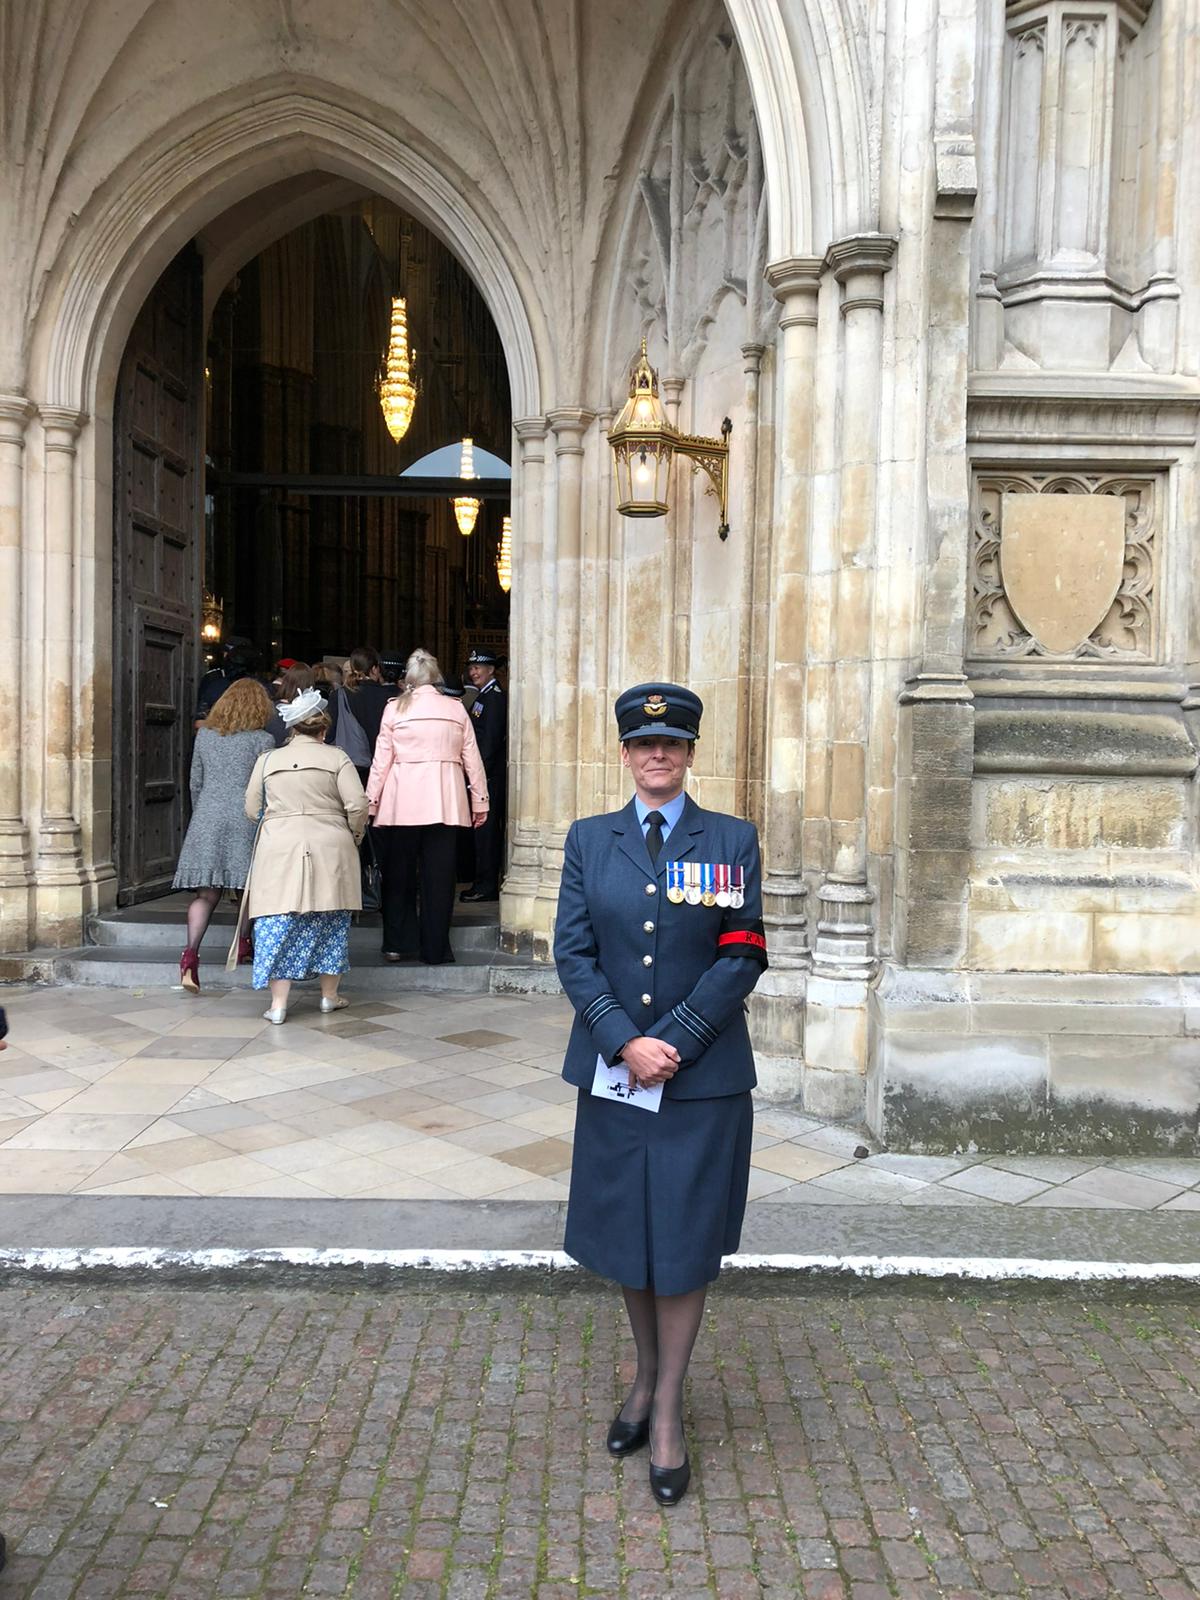 Image shows RAF aviator standing outside a cathedral.